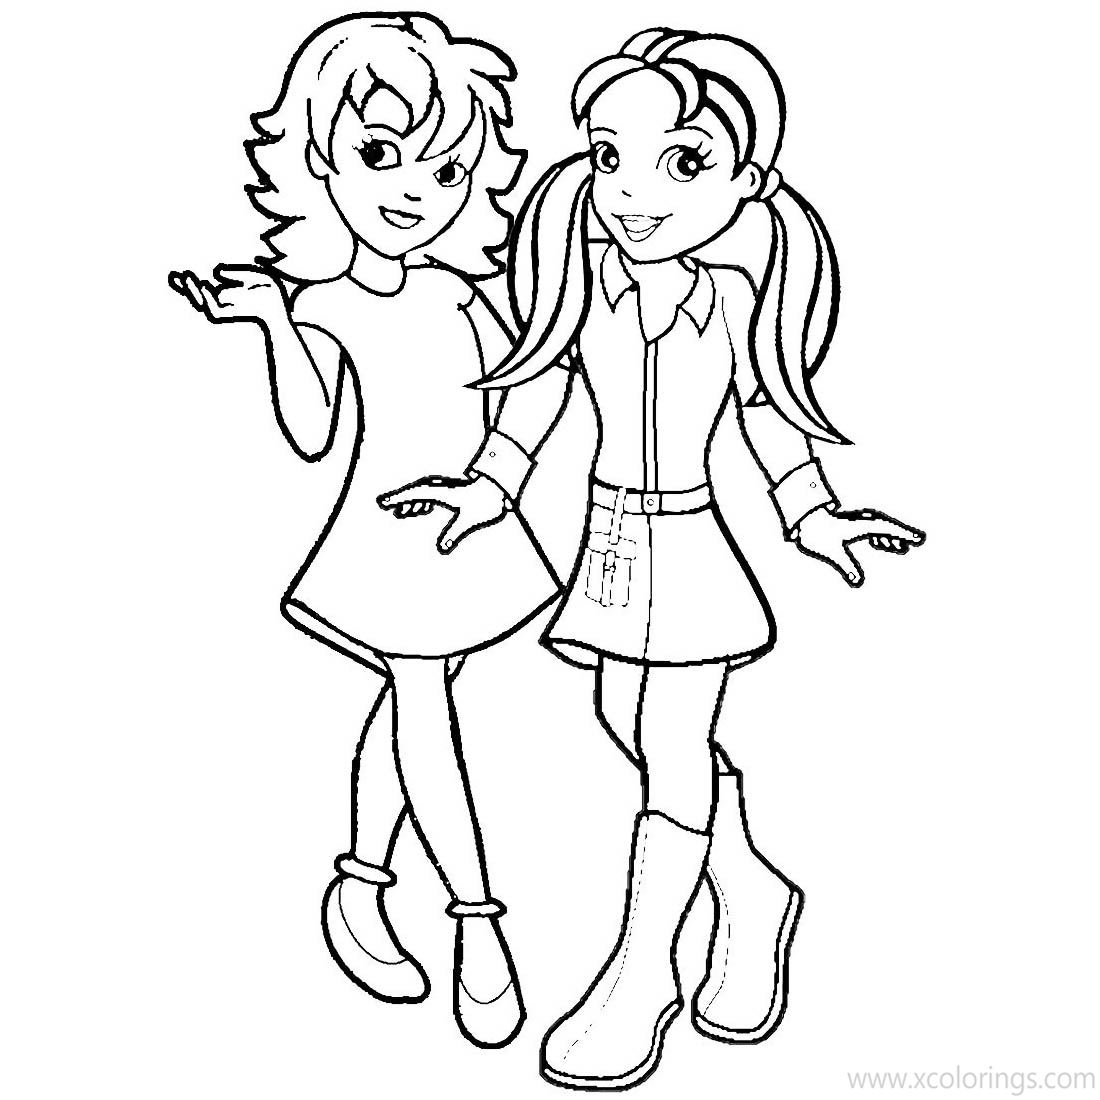 Free Polly Pocket Coloring Pages Chrissy printable